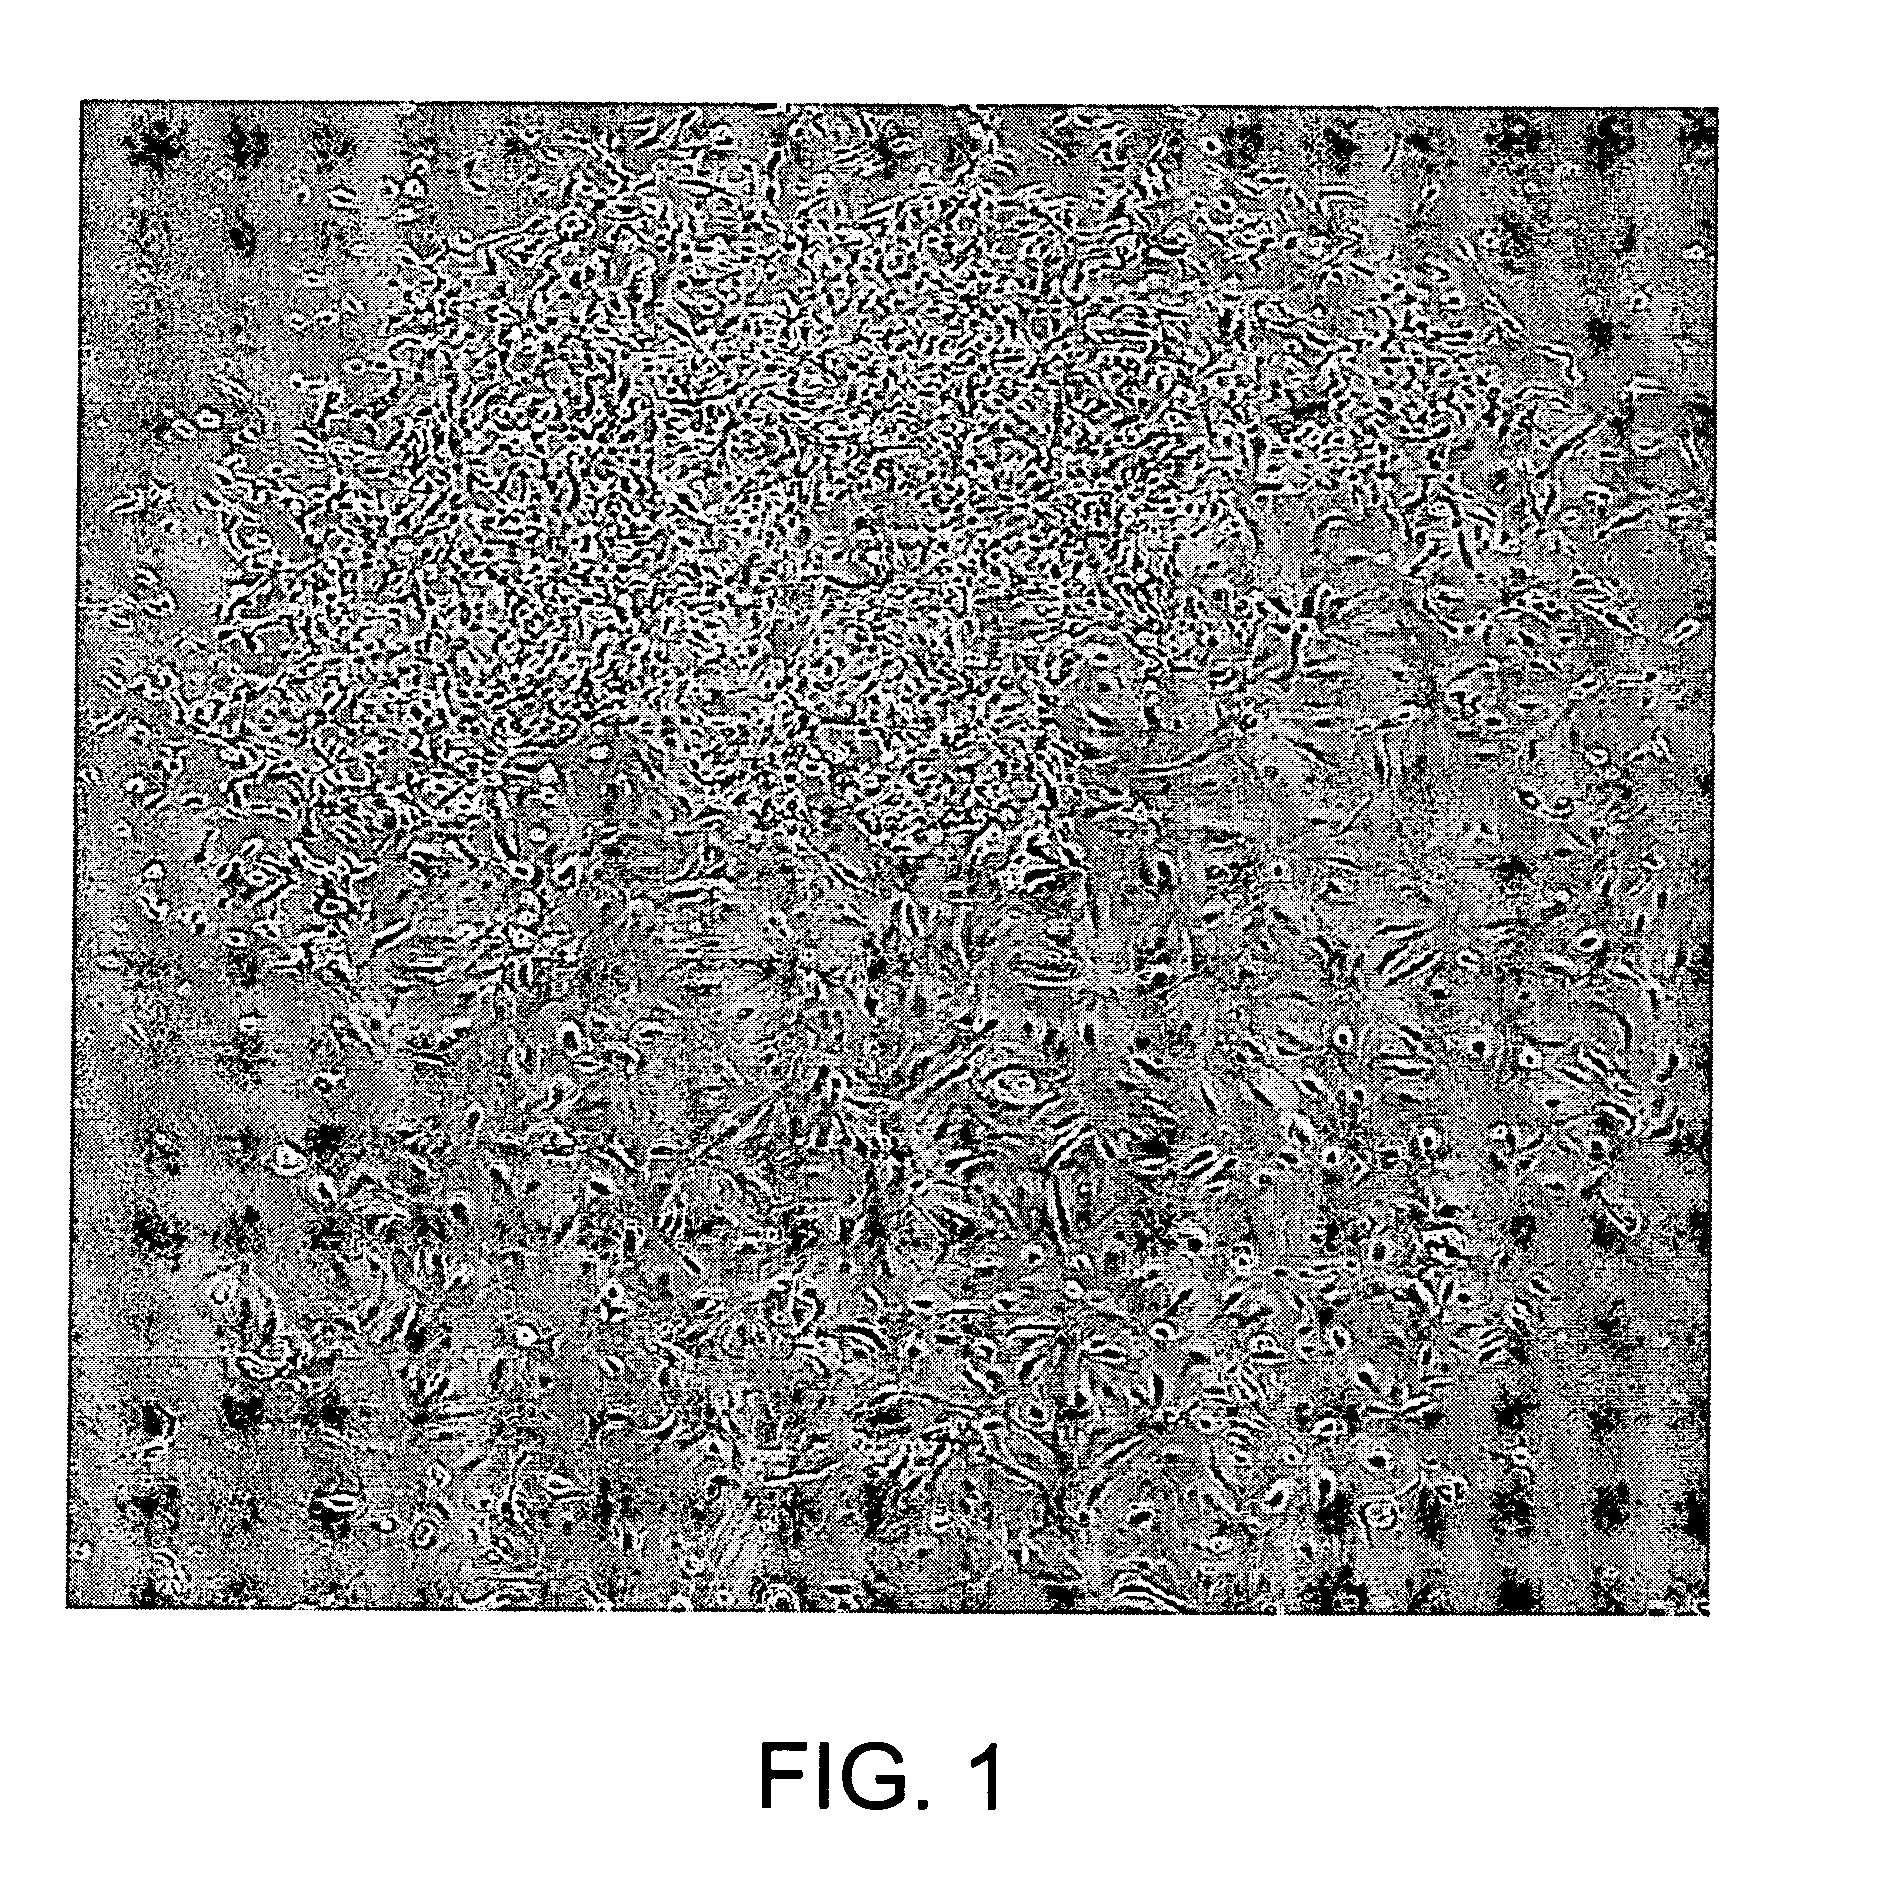 Adult stem cells and uses thereof